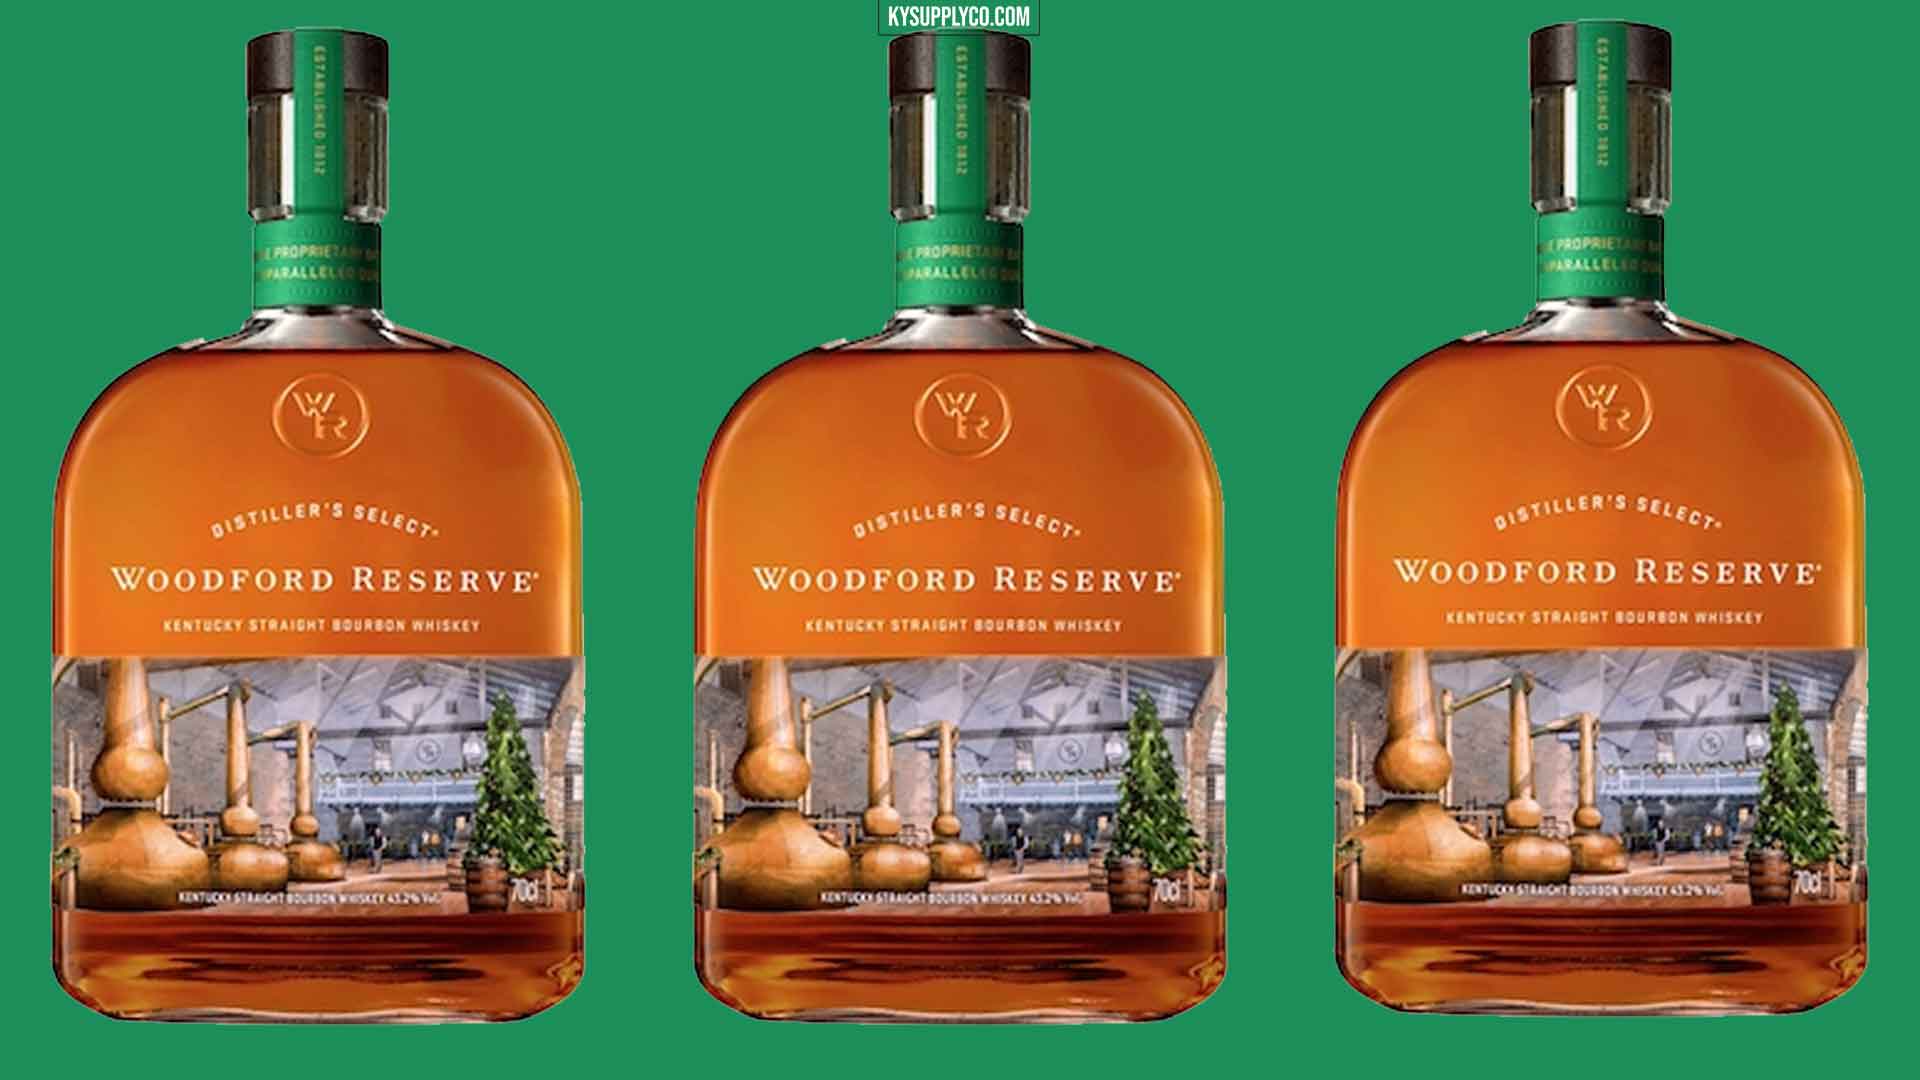 Woodford Reserve Holiday Bottle 2021 KY Supply Co